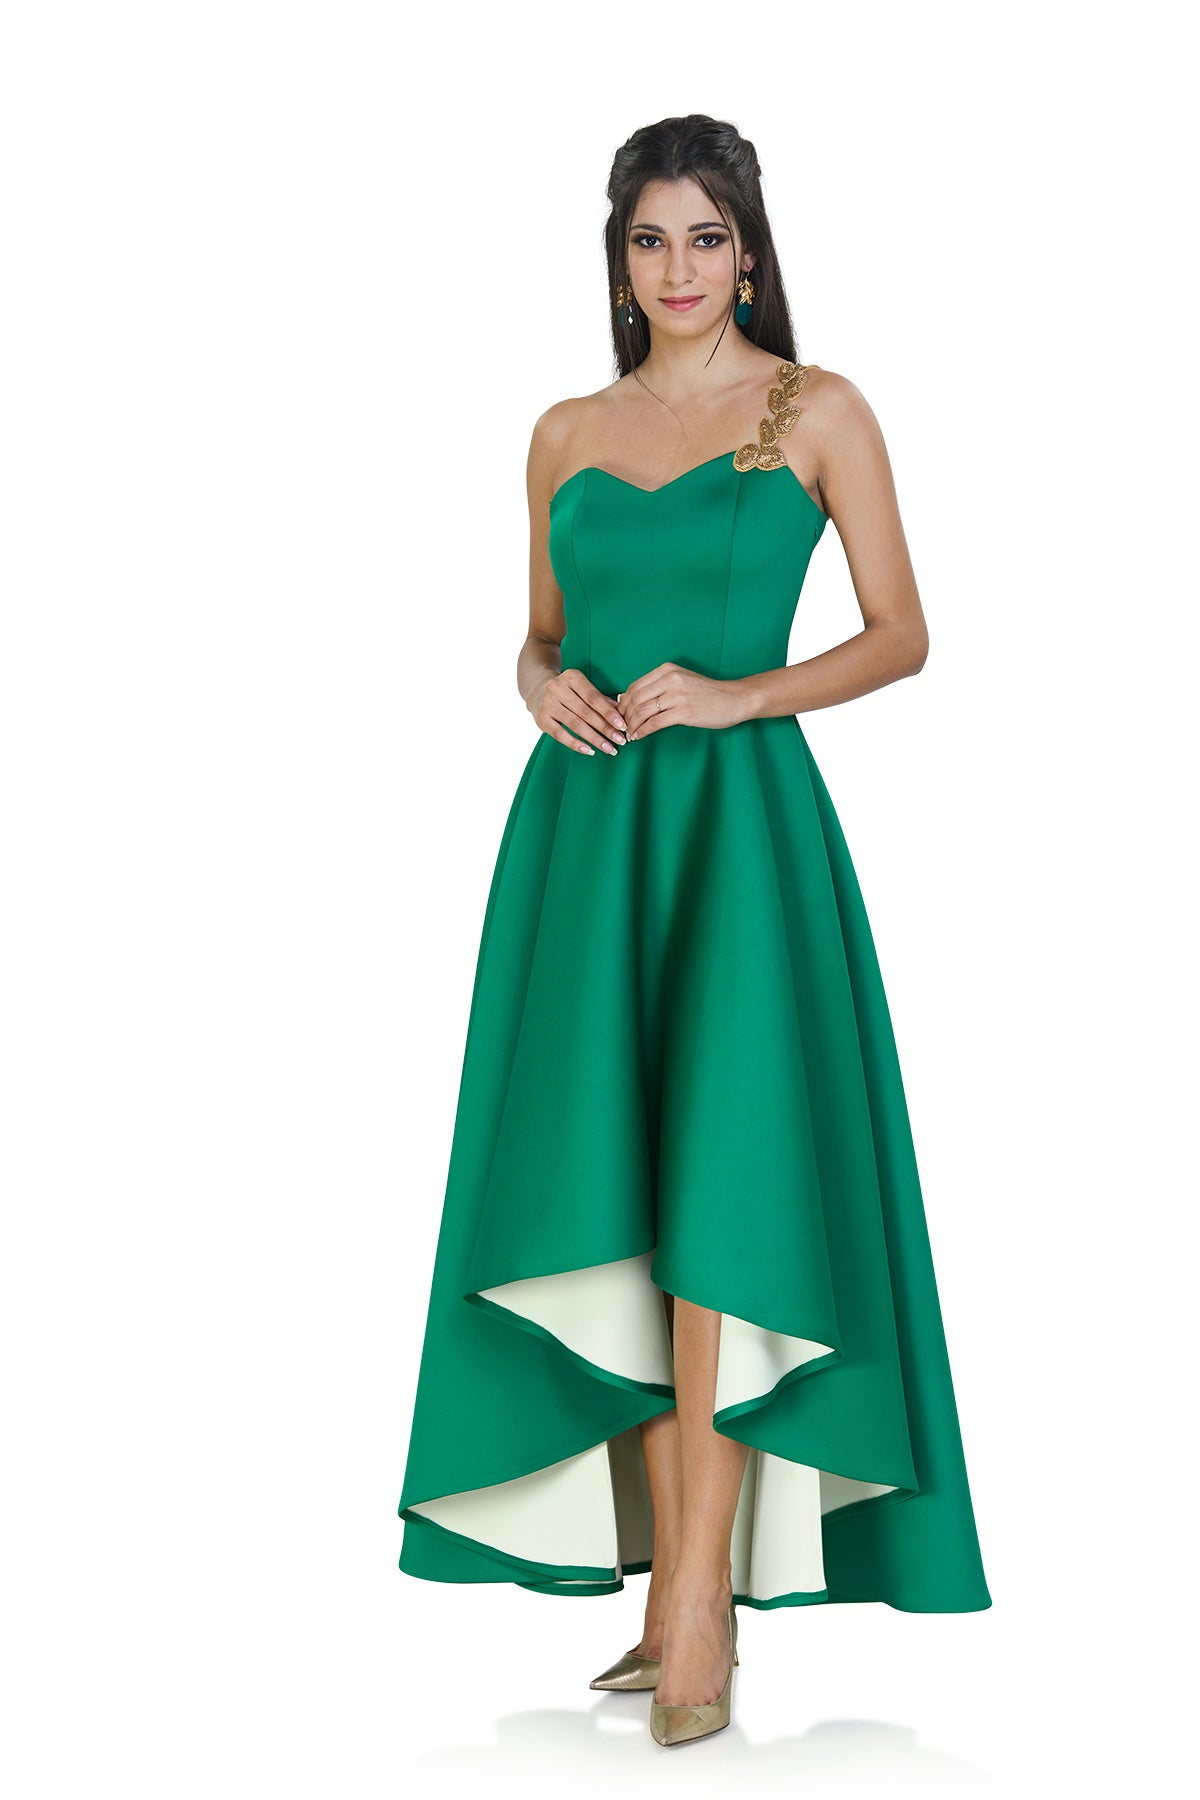 Turn heads in this one shoulder green glory gown with its asymmetrical cut and elegant leafy golden straps. The cascading effect at the bottom highlights the dual-toned scuba fabric creating a mesmerizing look.